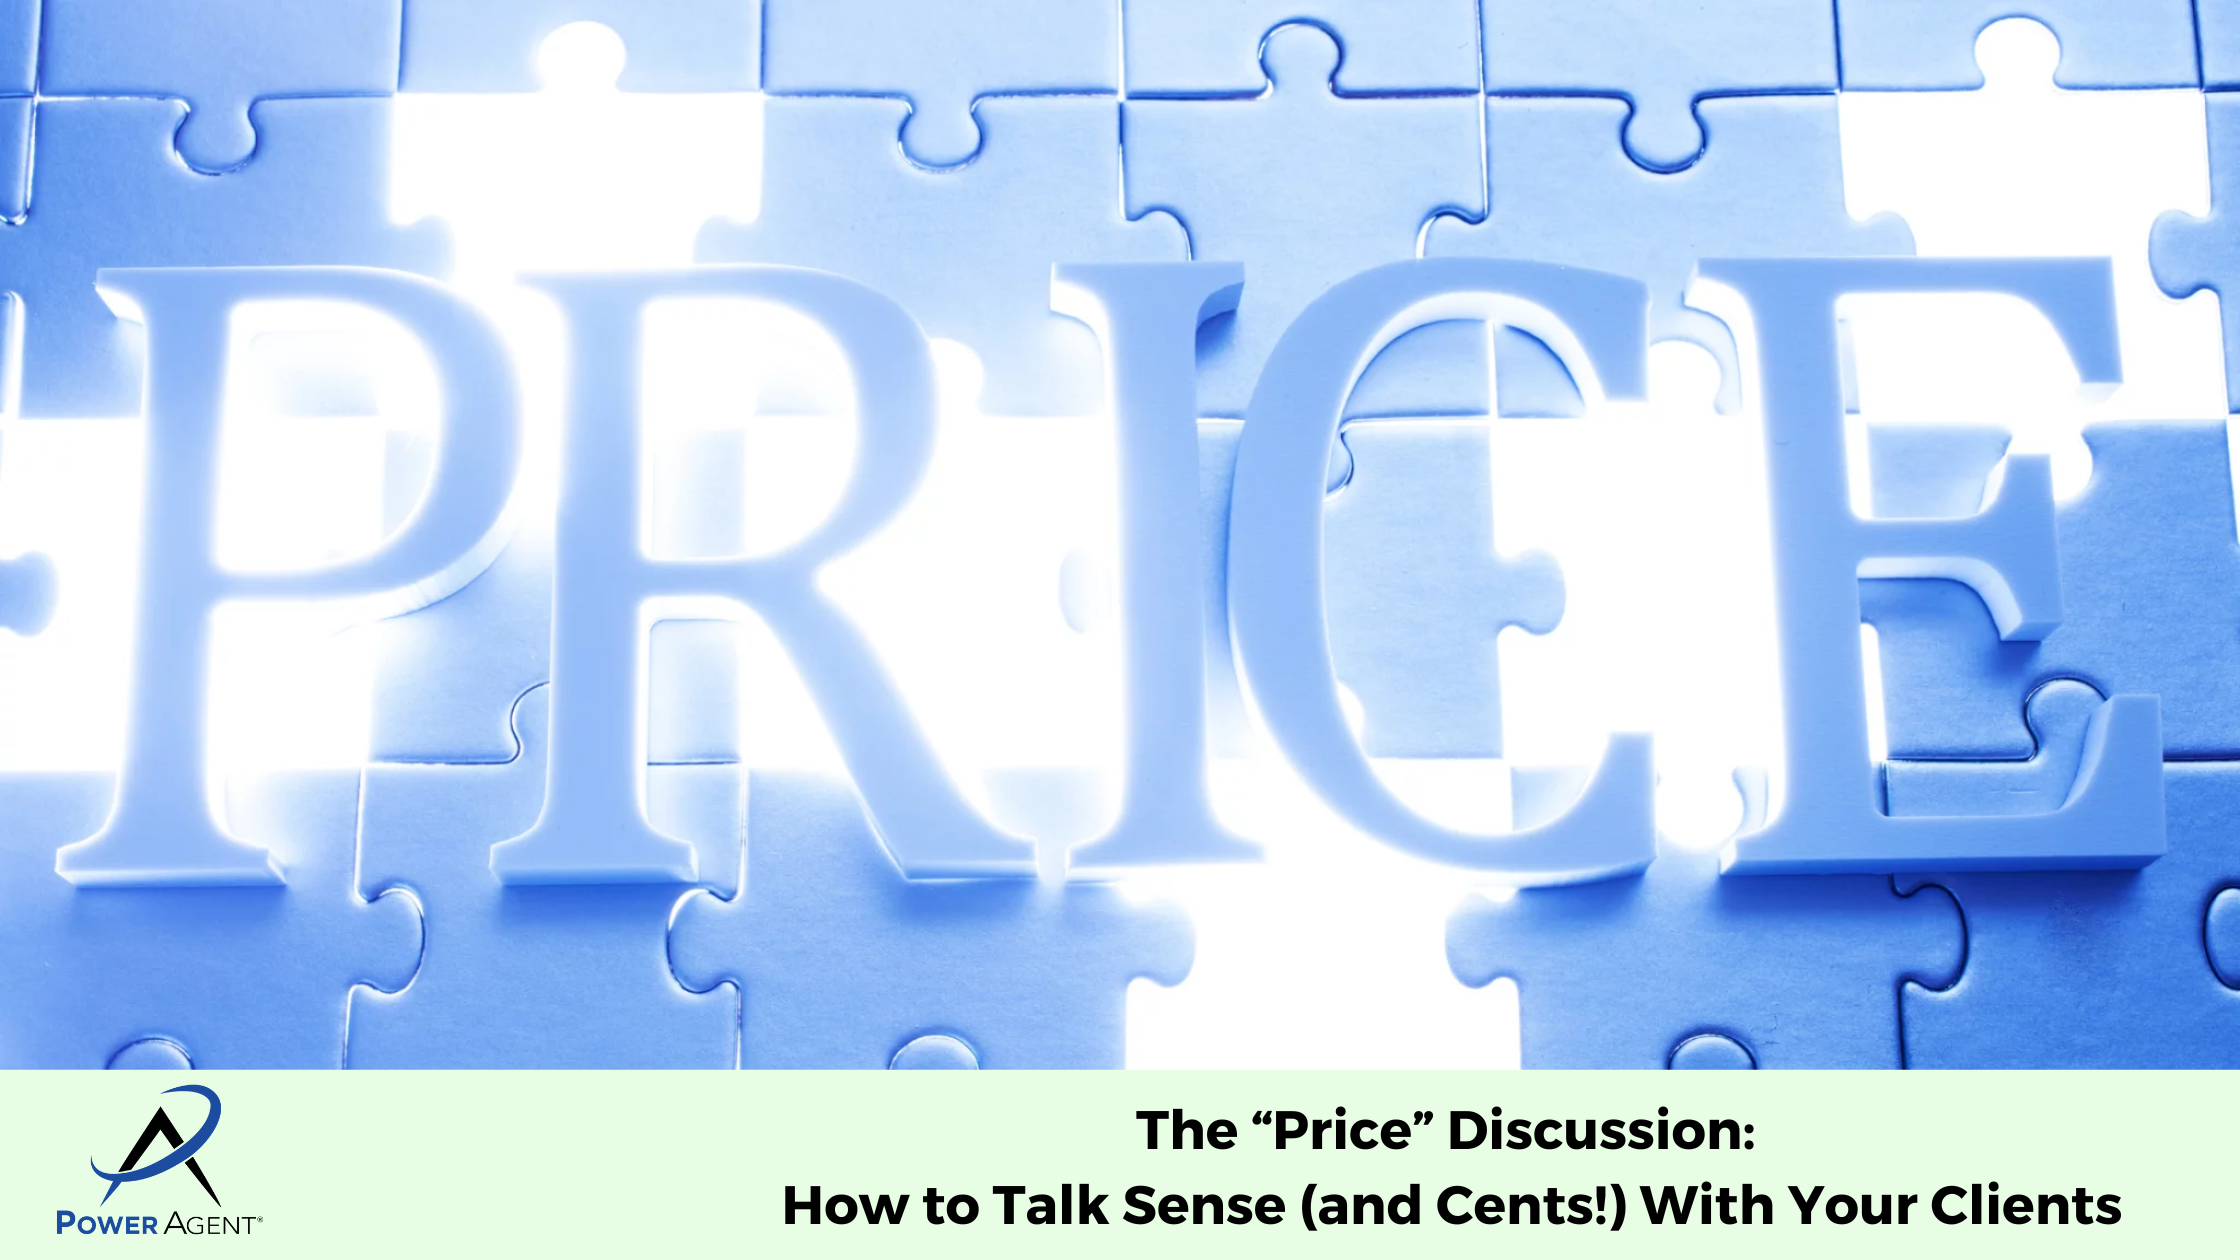 The “Price” Discussion: How to Talk Sense (and Cents!) With Your Clients